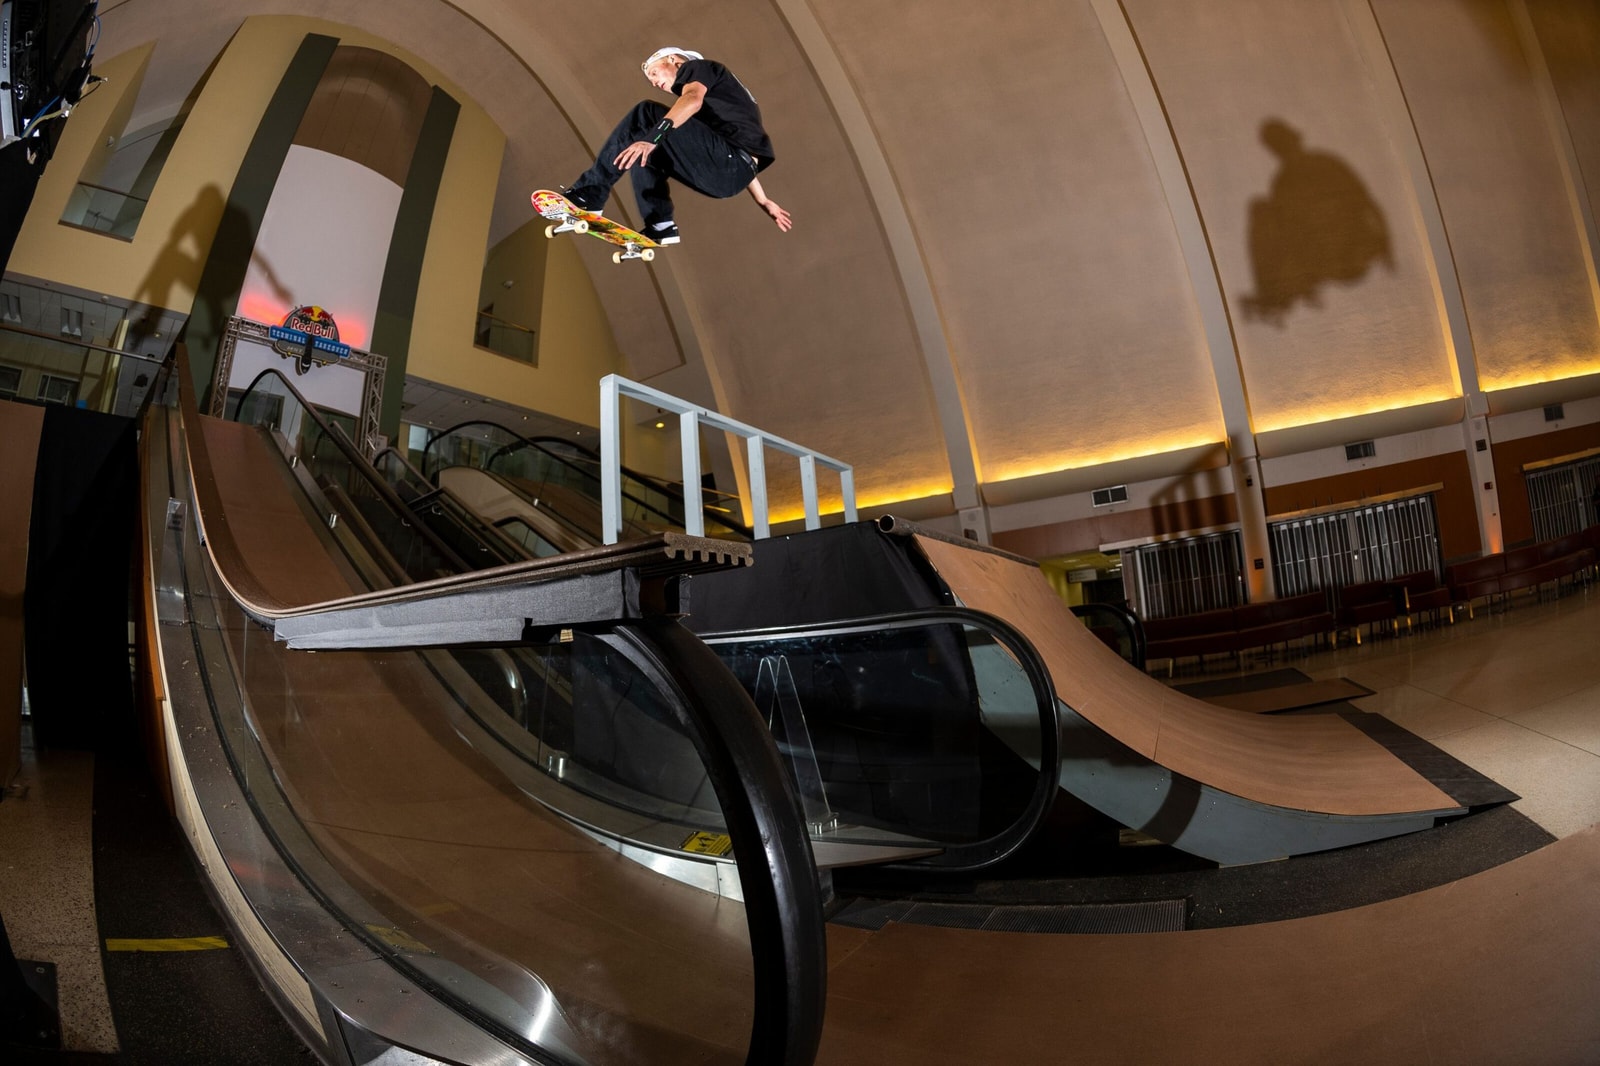 Jake Wooten Skates Abandoned Airport In Red Bull's Terminal Takeover